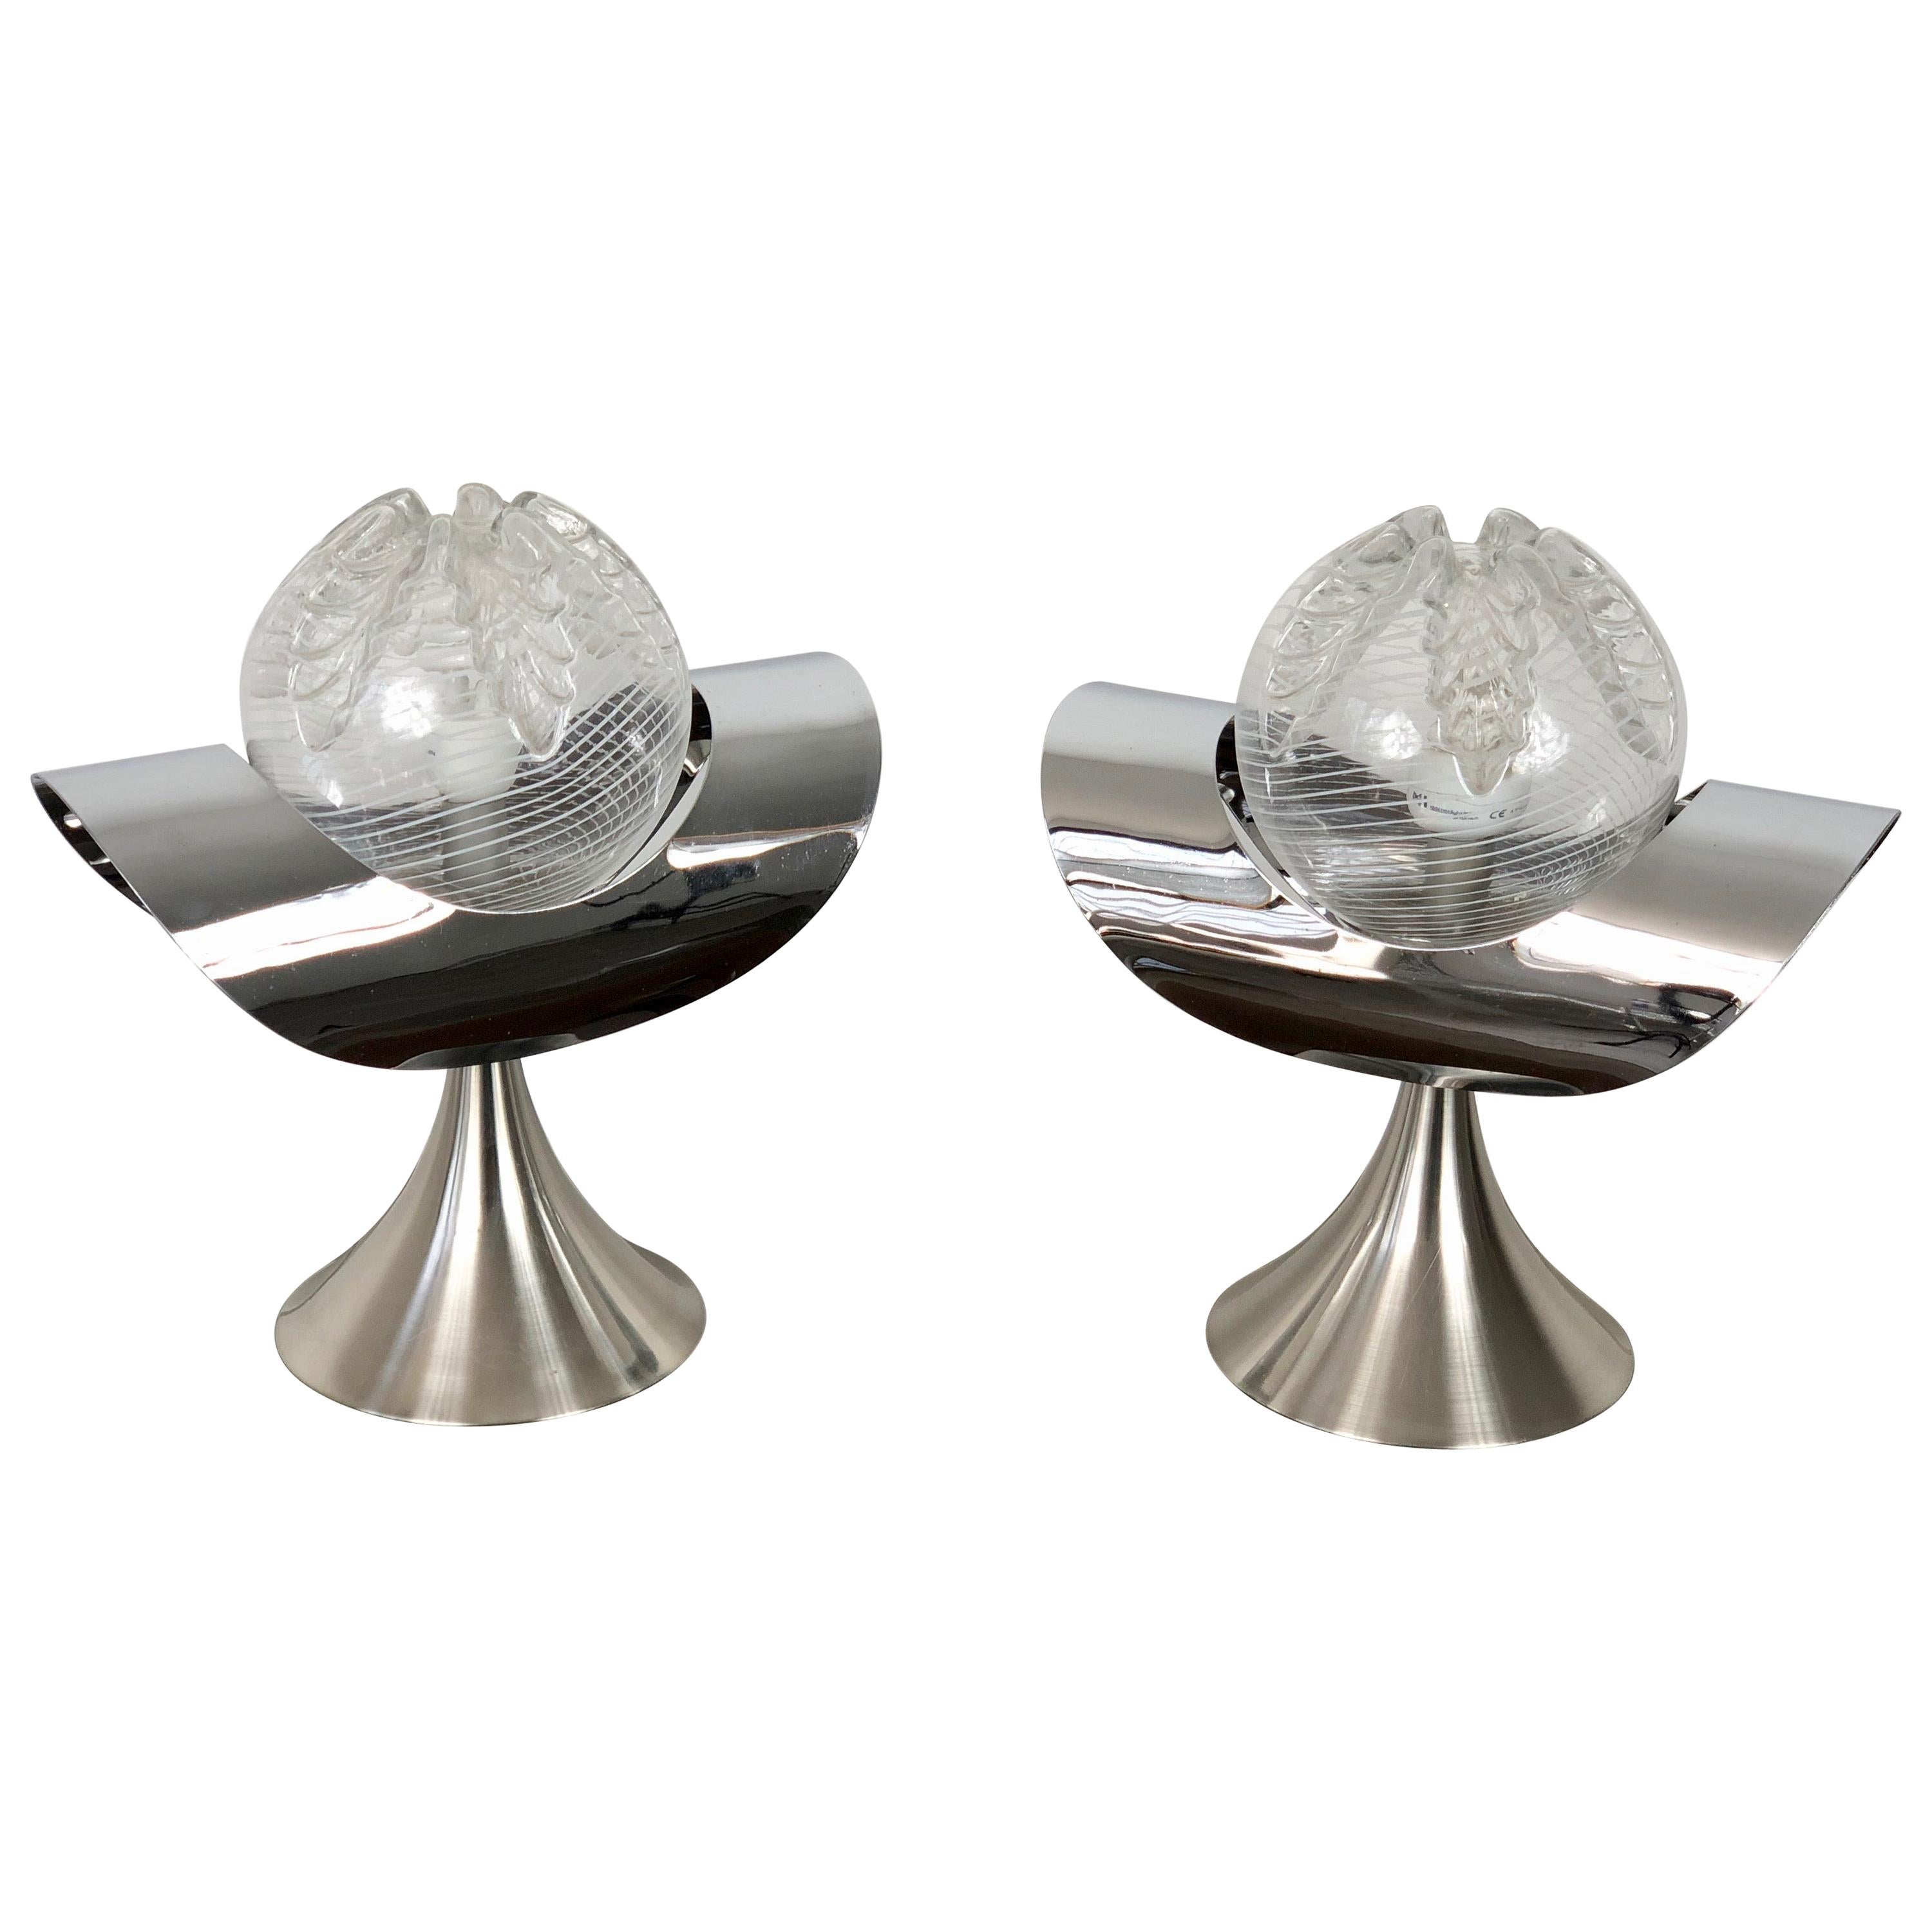 Pair of Chrome, Steel and Glass Table Lamp, Italy, 1970s